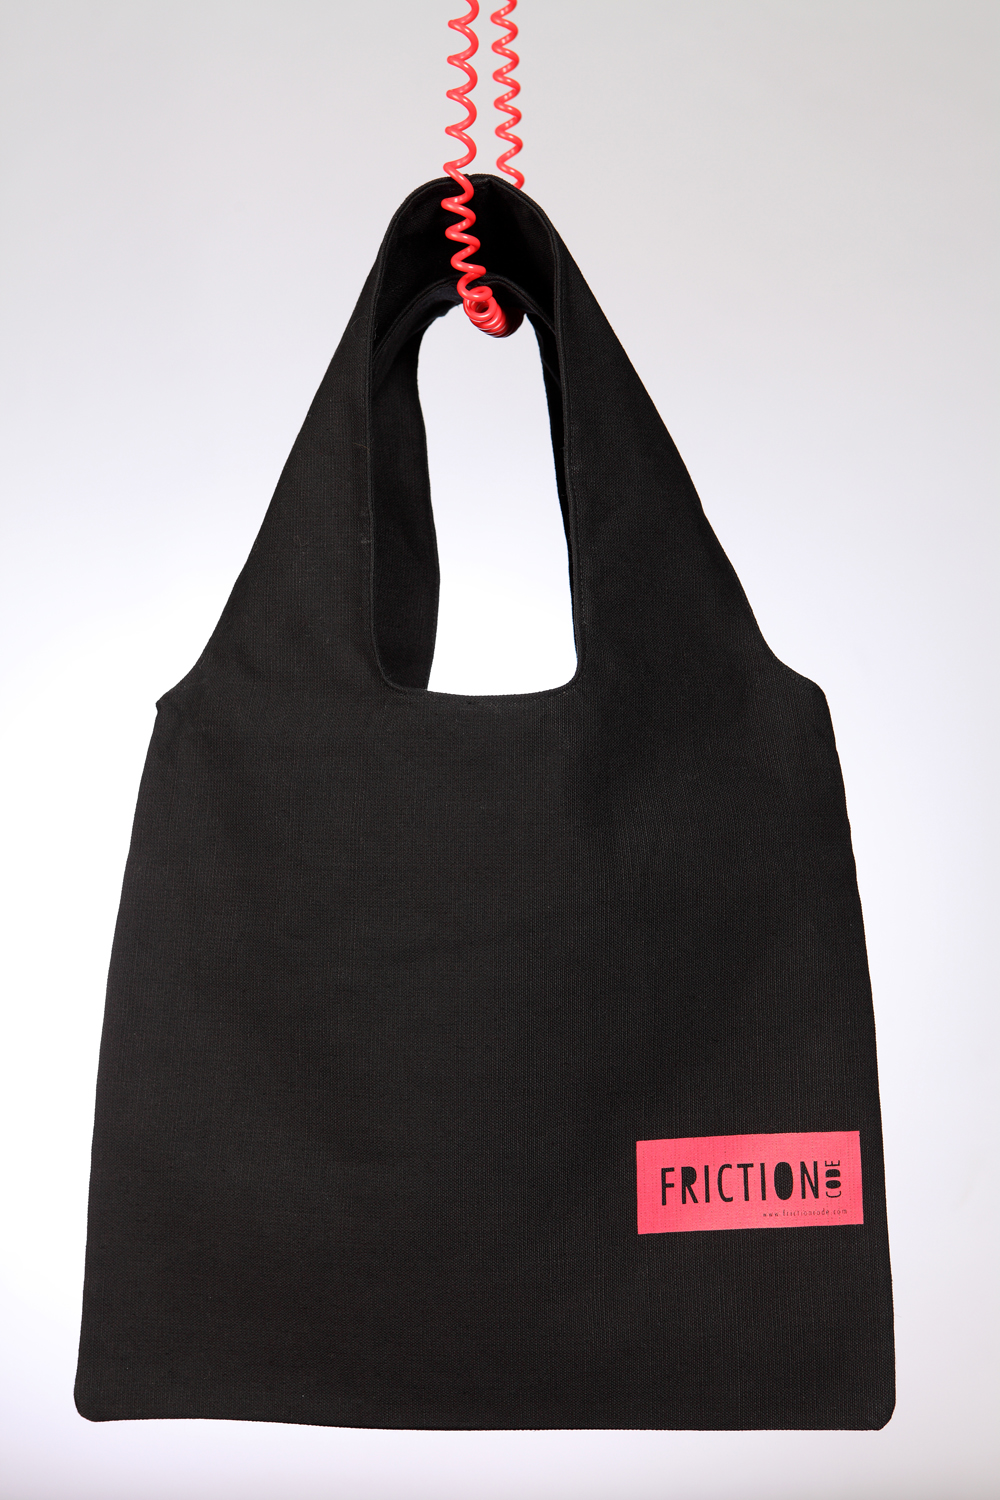 Black bag with red label